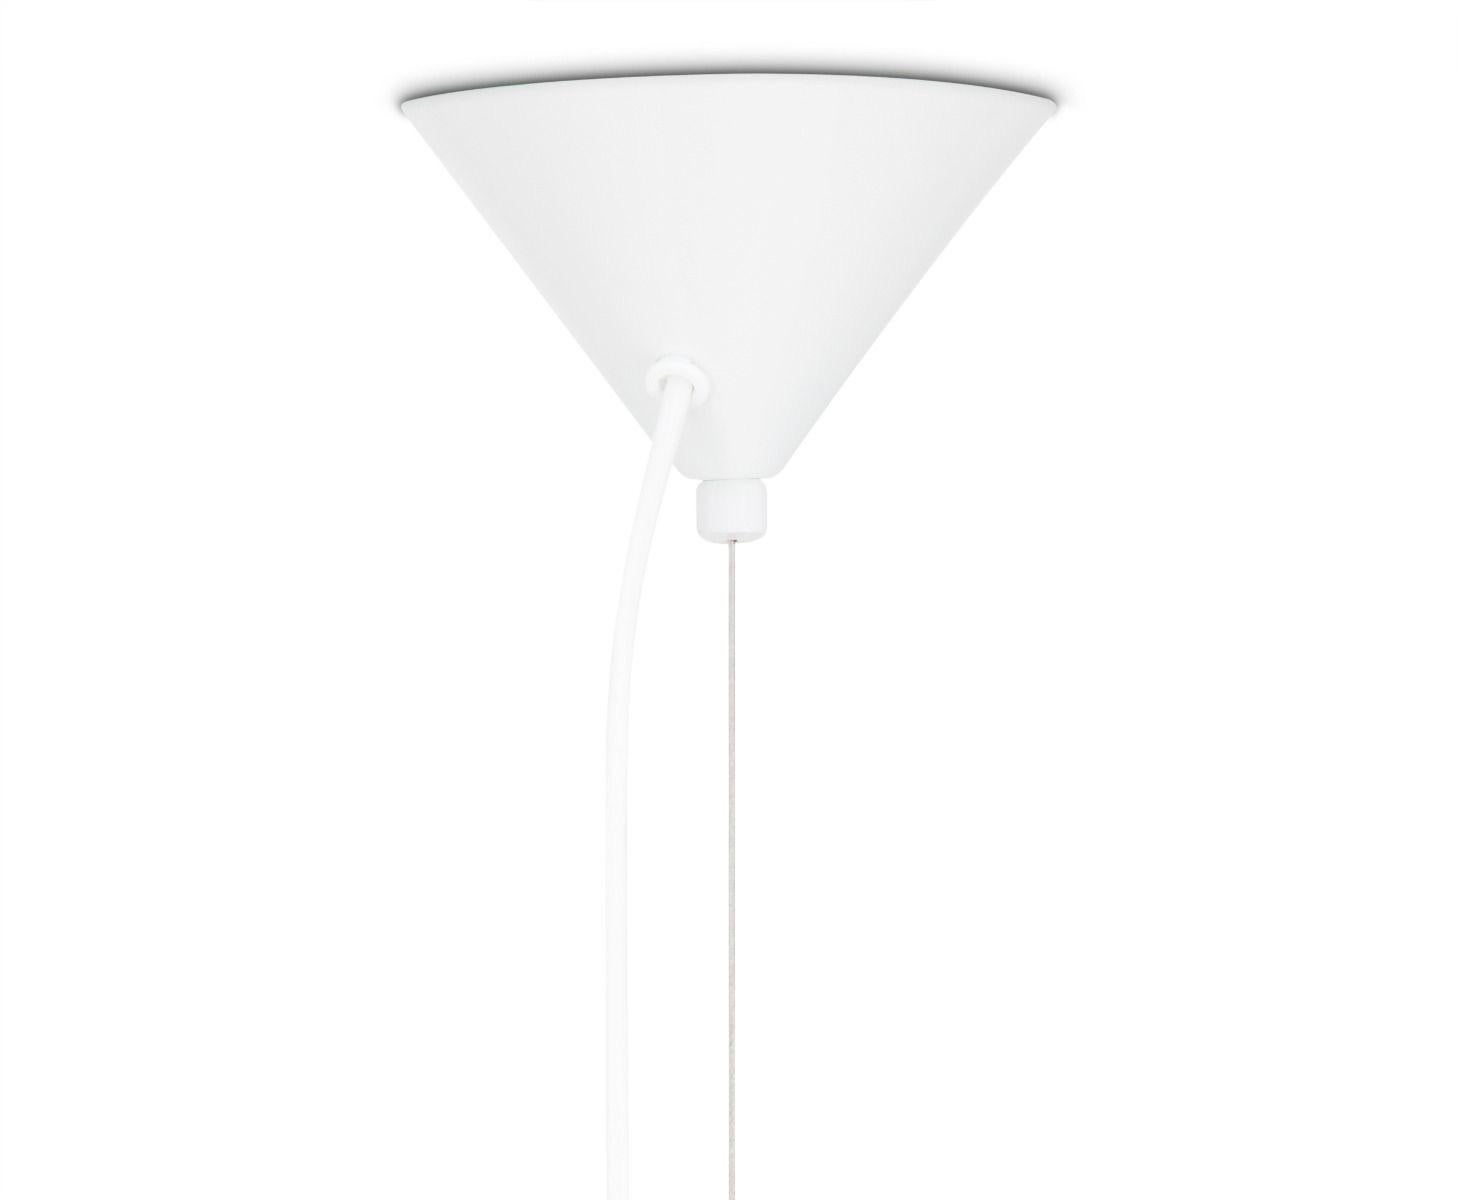 Tom Dixon beat stout pendant light fixture, white, modern lighting, UK. Iconic contemporary design. New in box, never installed. MSRP 1270 USD.
white version of the famous original beat light. The exterior is lacquered in a gloss white, contrasting